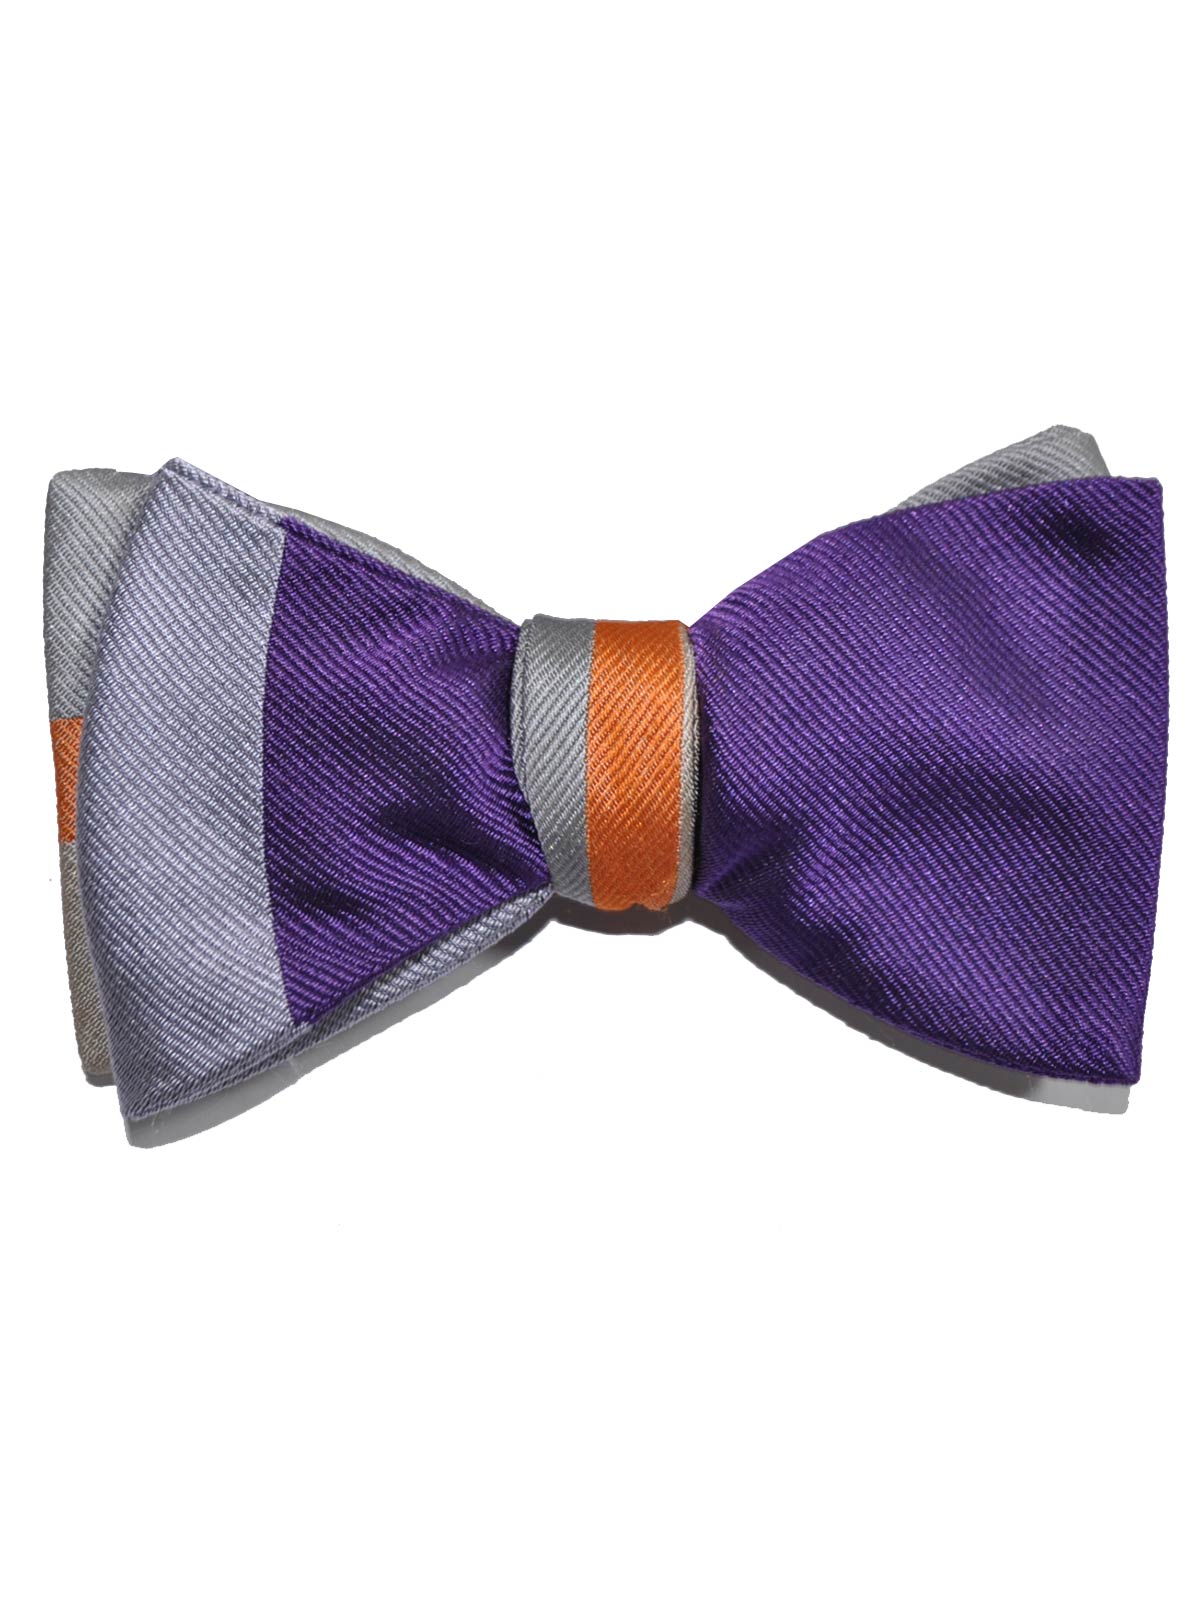 Gene Meyer Bow Tie Purple Lilac Hand Made in Italy